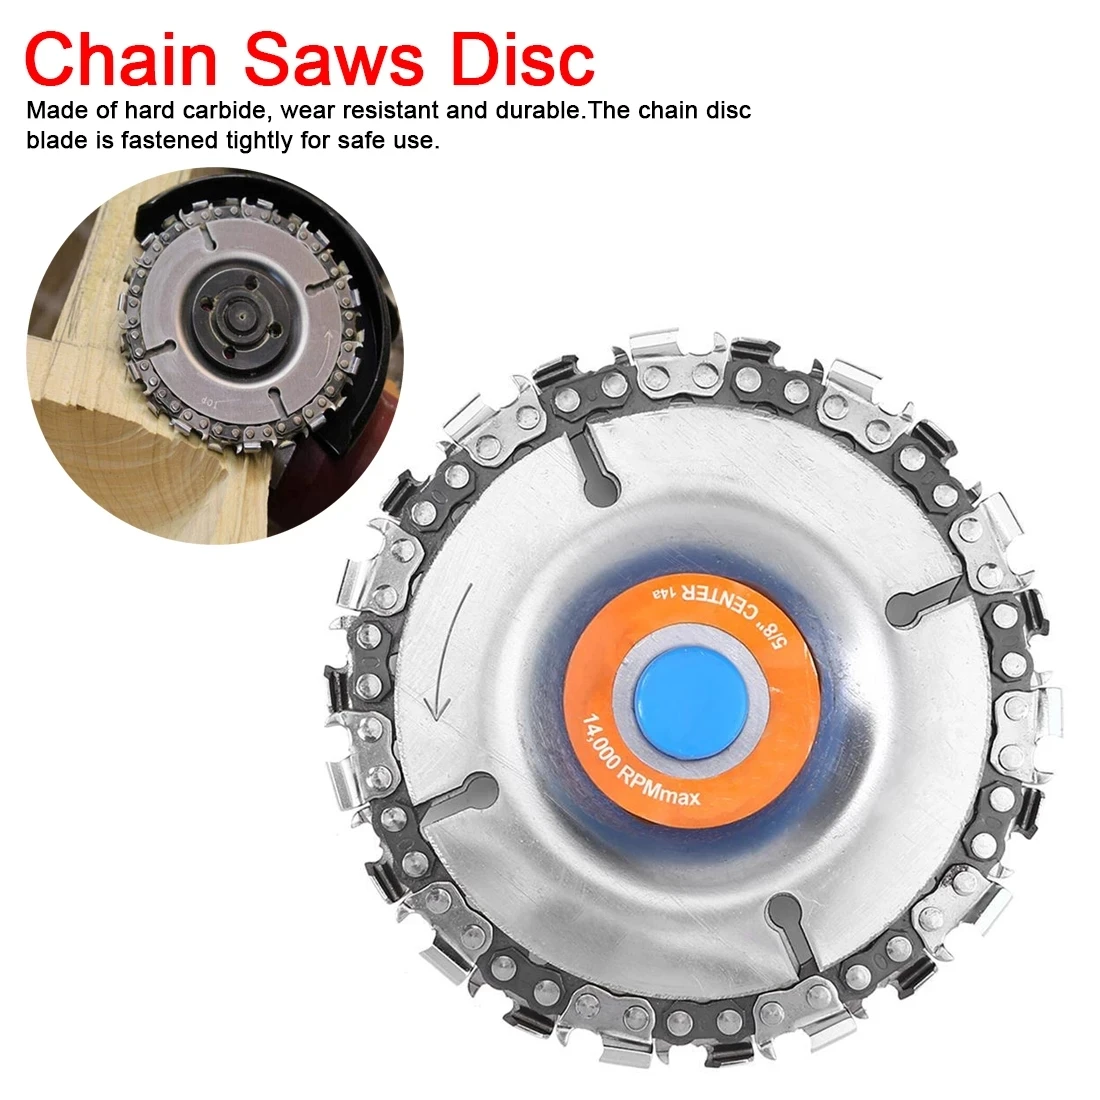 4 Inch Chain Grinder Chain Saws Disc Wood Carving Disc Angle Grinding Tools US 